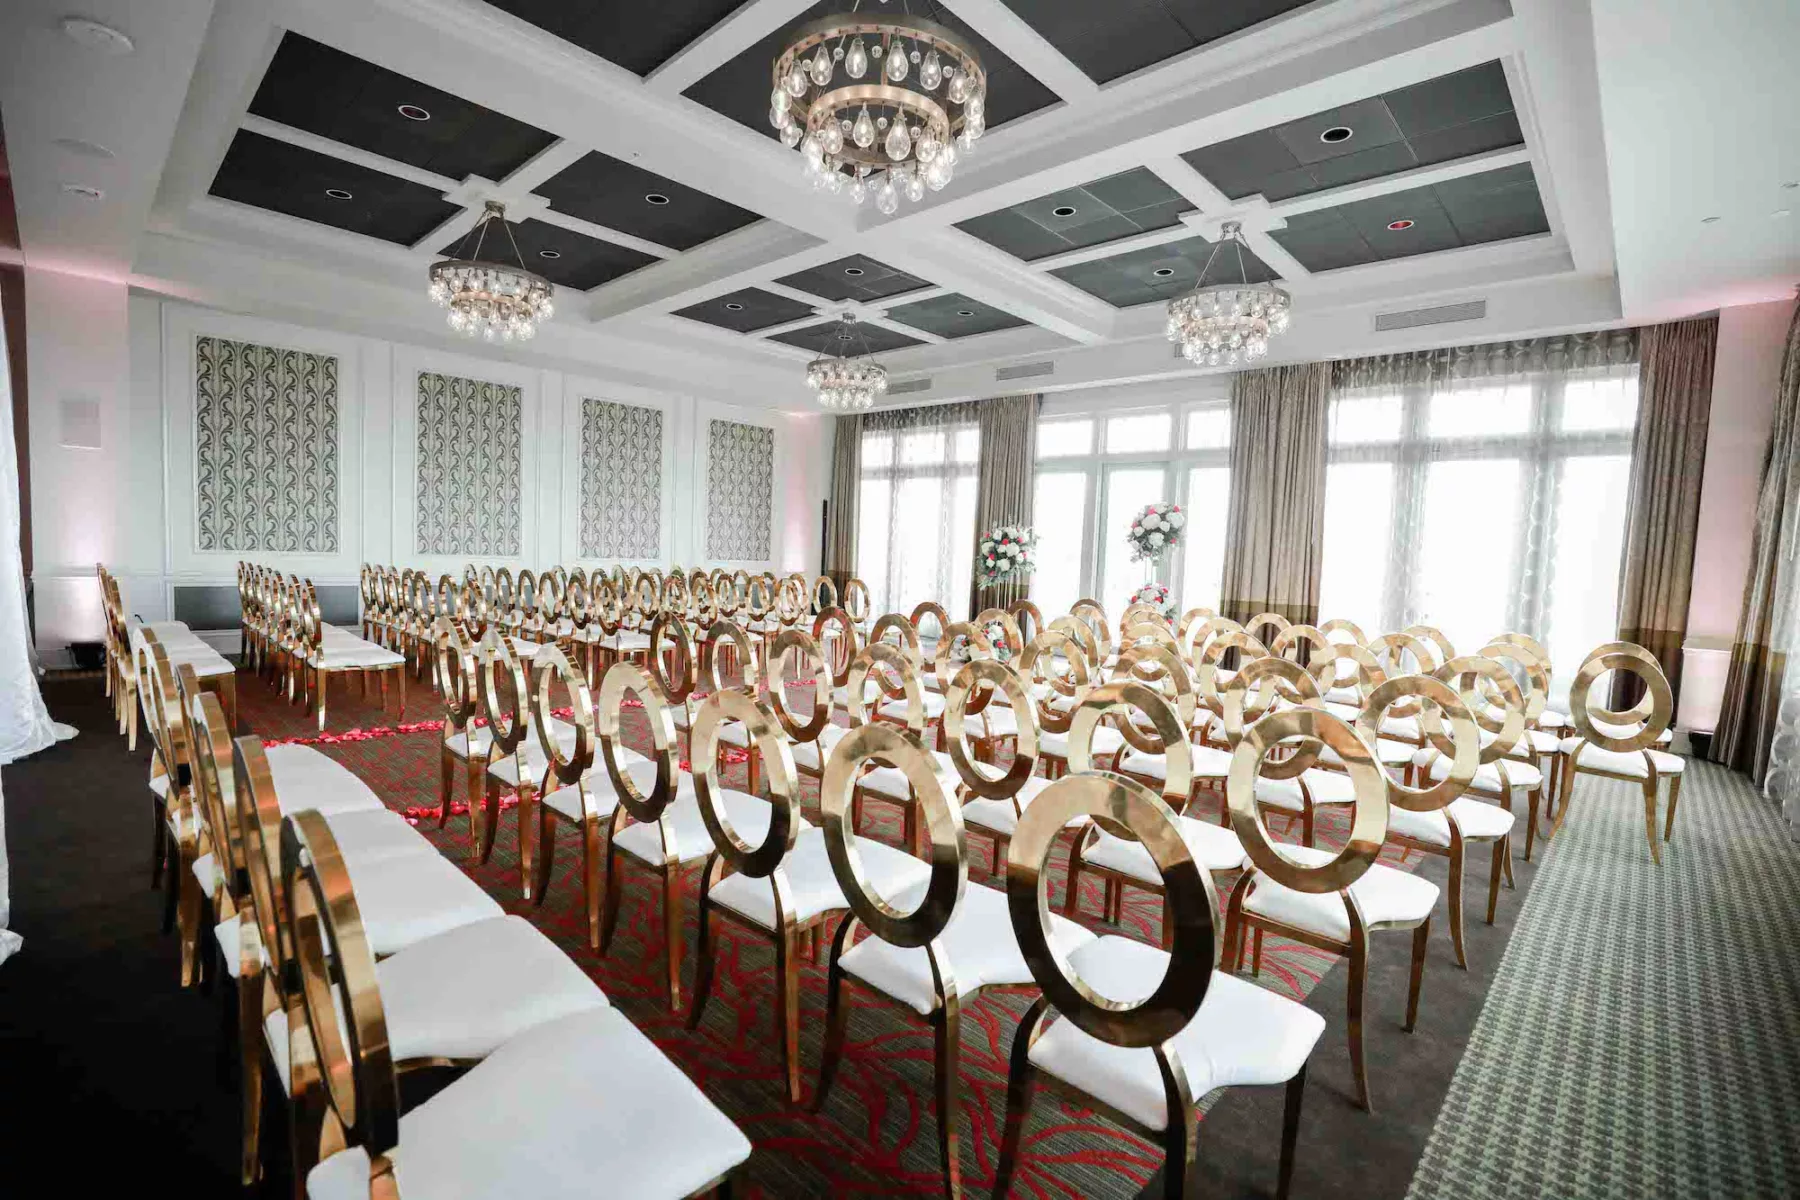 Indoor Grand Ballroom Wedding Ceremony Inspiration | Gold Oval Top Chair Ideas | Tampa Bay Event Venue The Birchwood